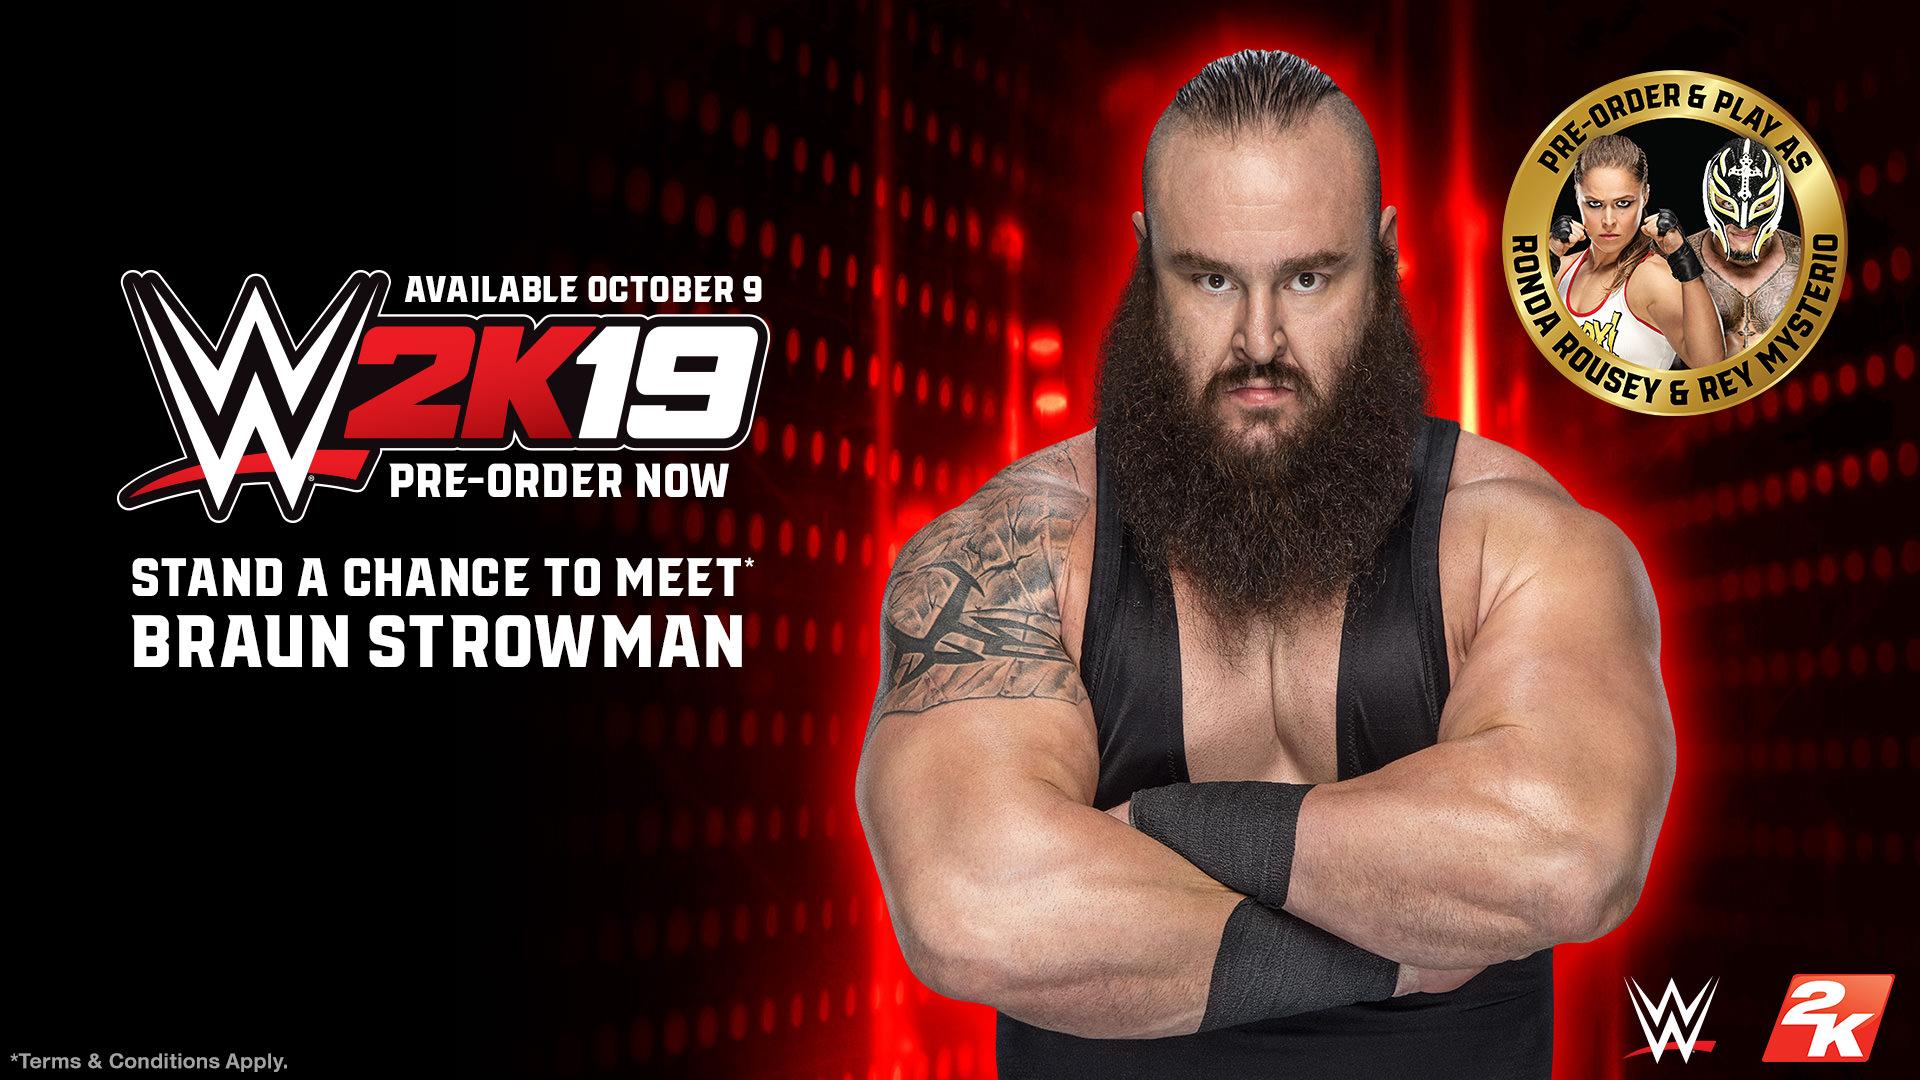 Pre Order WWE 2K19 And Stand A Chance To Meet Braun Strowman